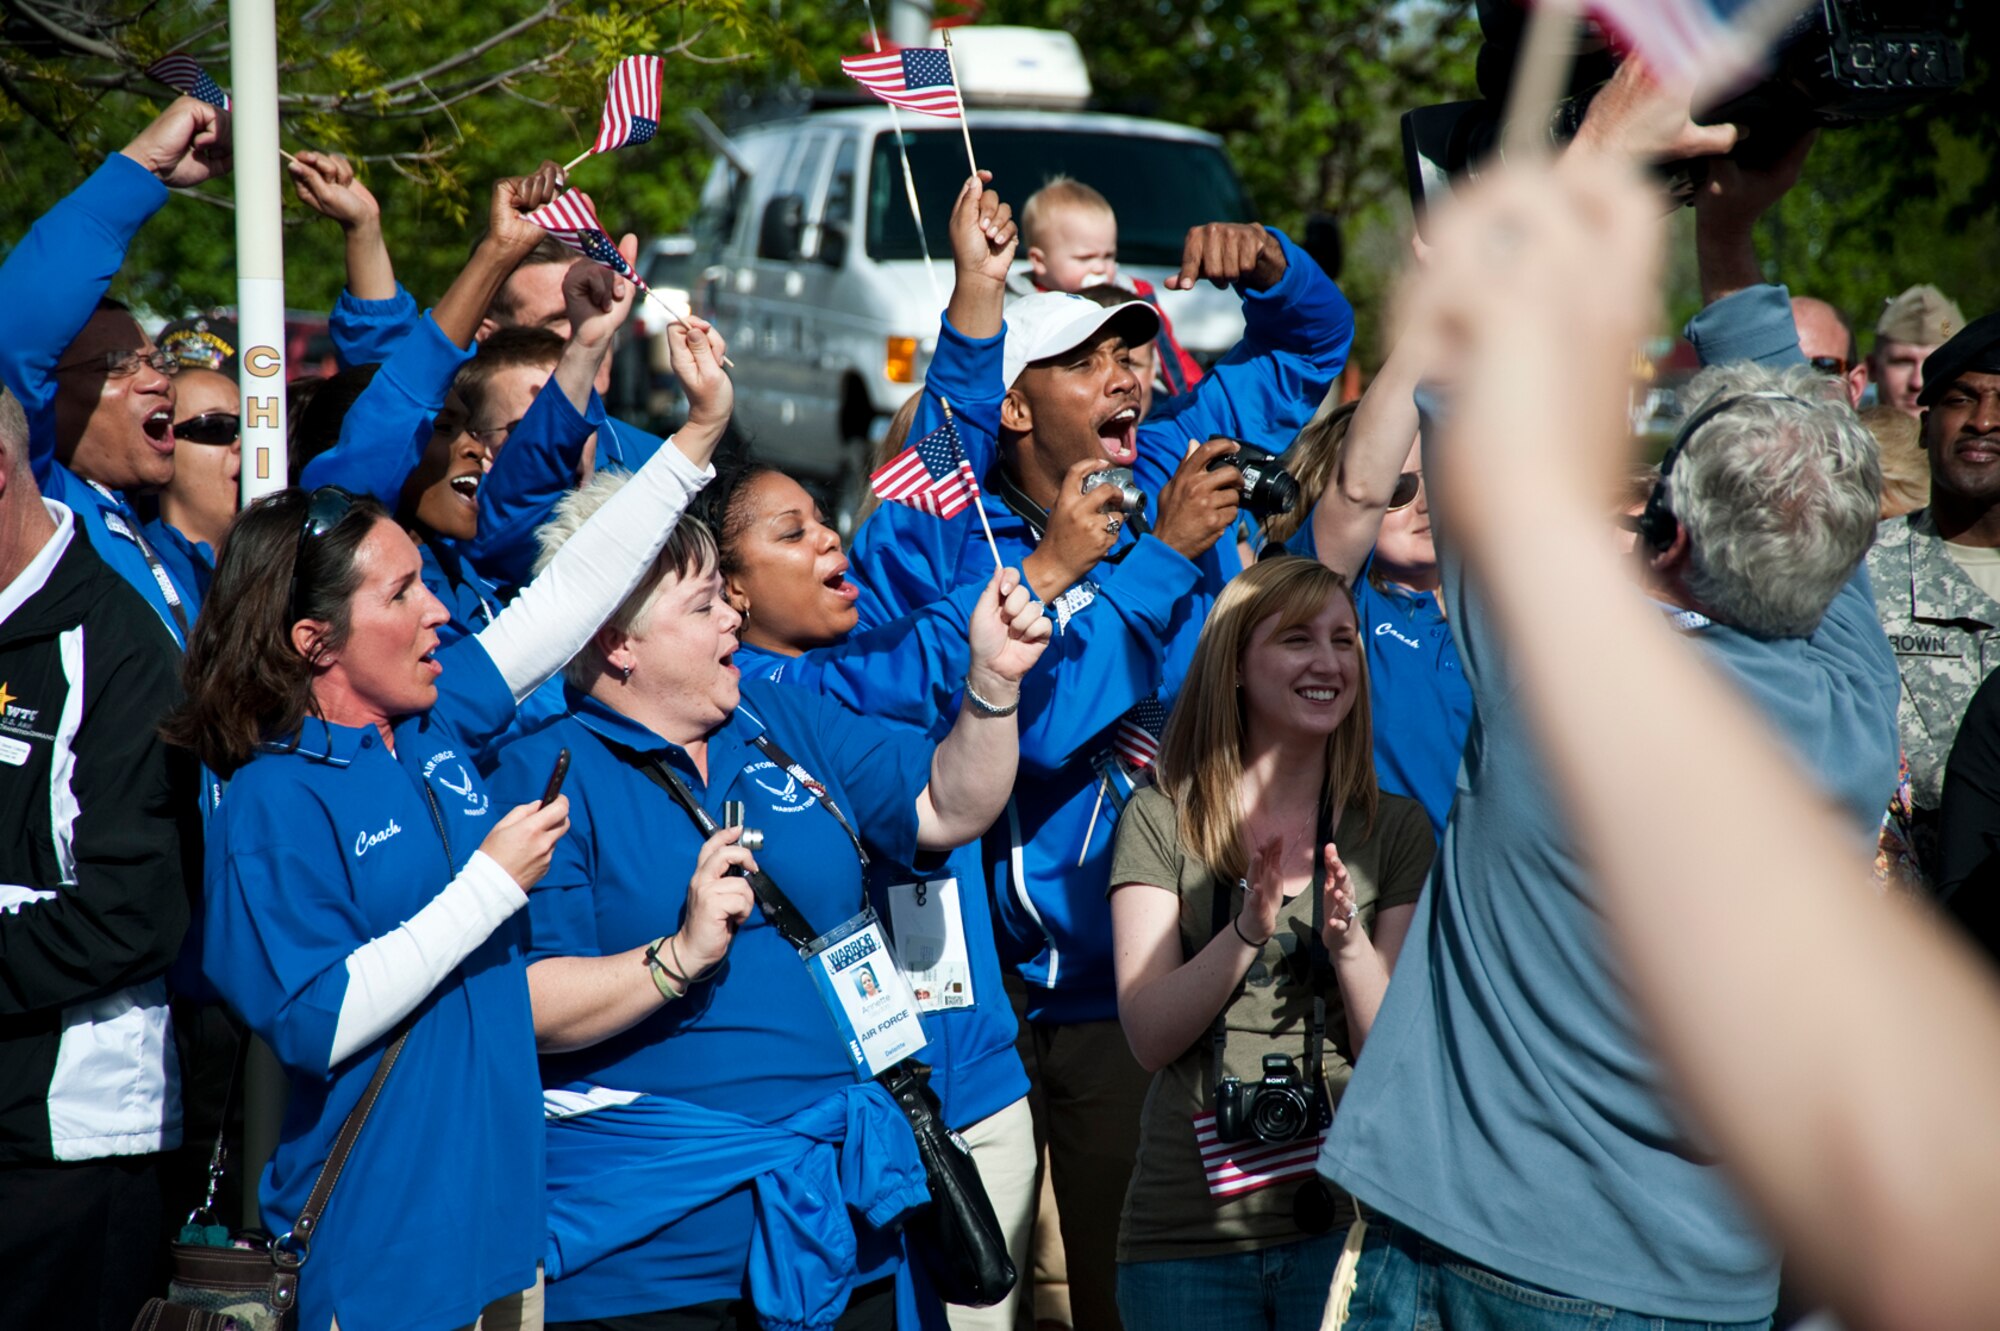 Supporters, friends and family members cheer on the Air Force team during the 2011 Warrior Games opening ceremony May 16, 2011, at the U.S. Olympic Training Center in Colorado Springs, Colo. (U.S. Air Force photo/Staff Sgt. J. Paul Croxon)